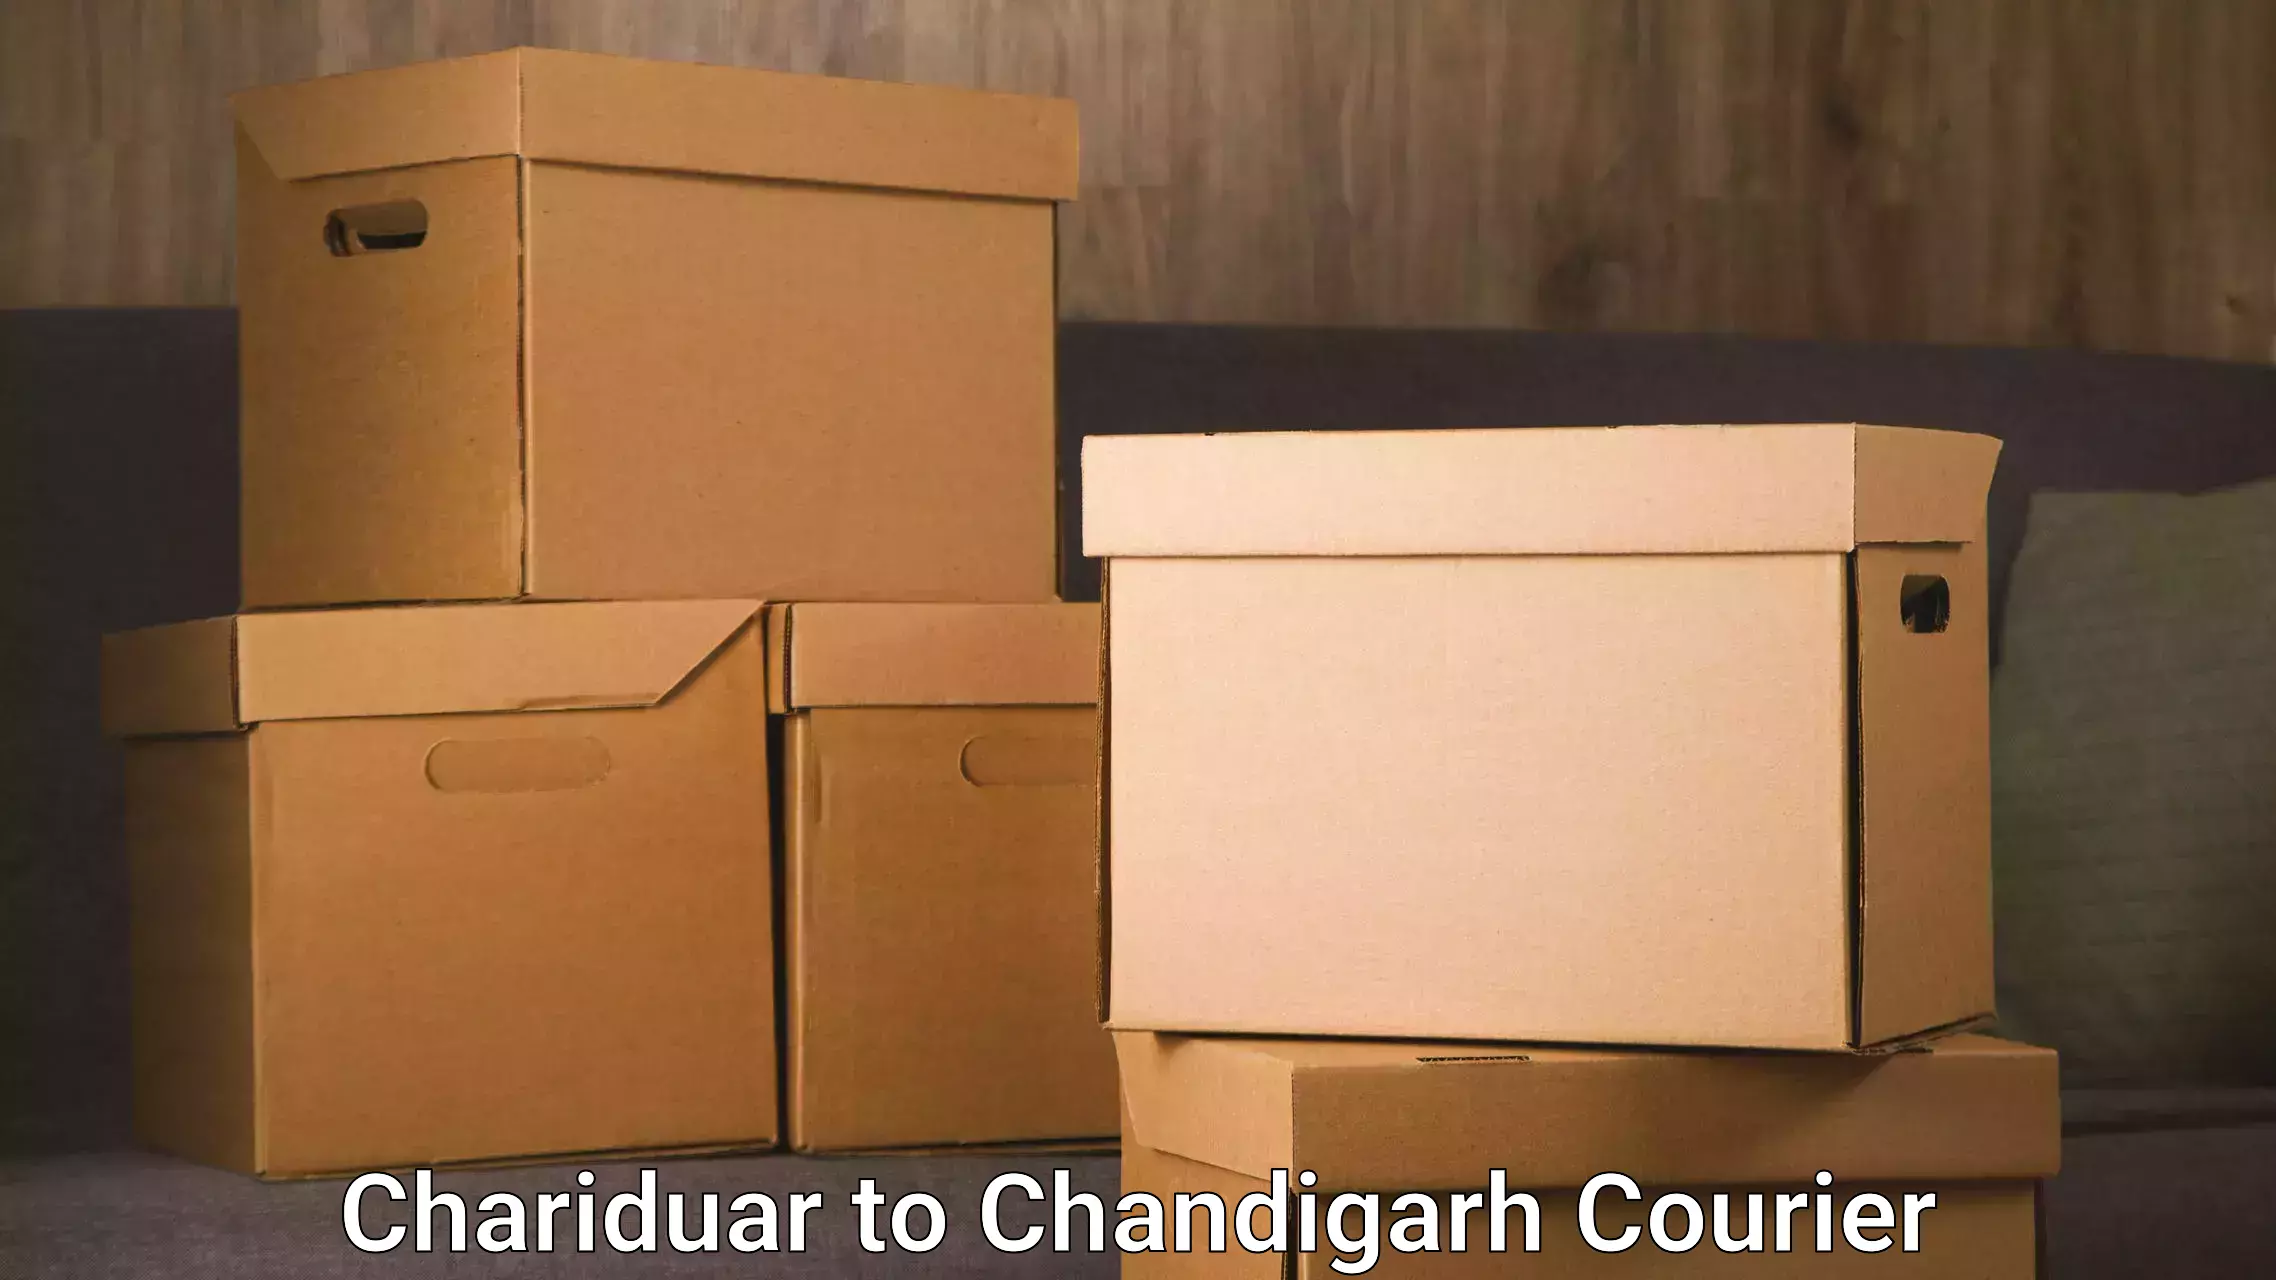 Express delivery capabilities Chariduar to Chandigarh